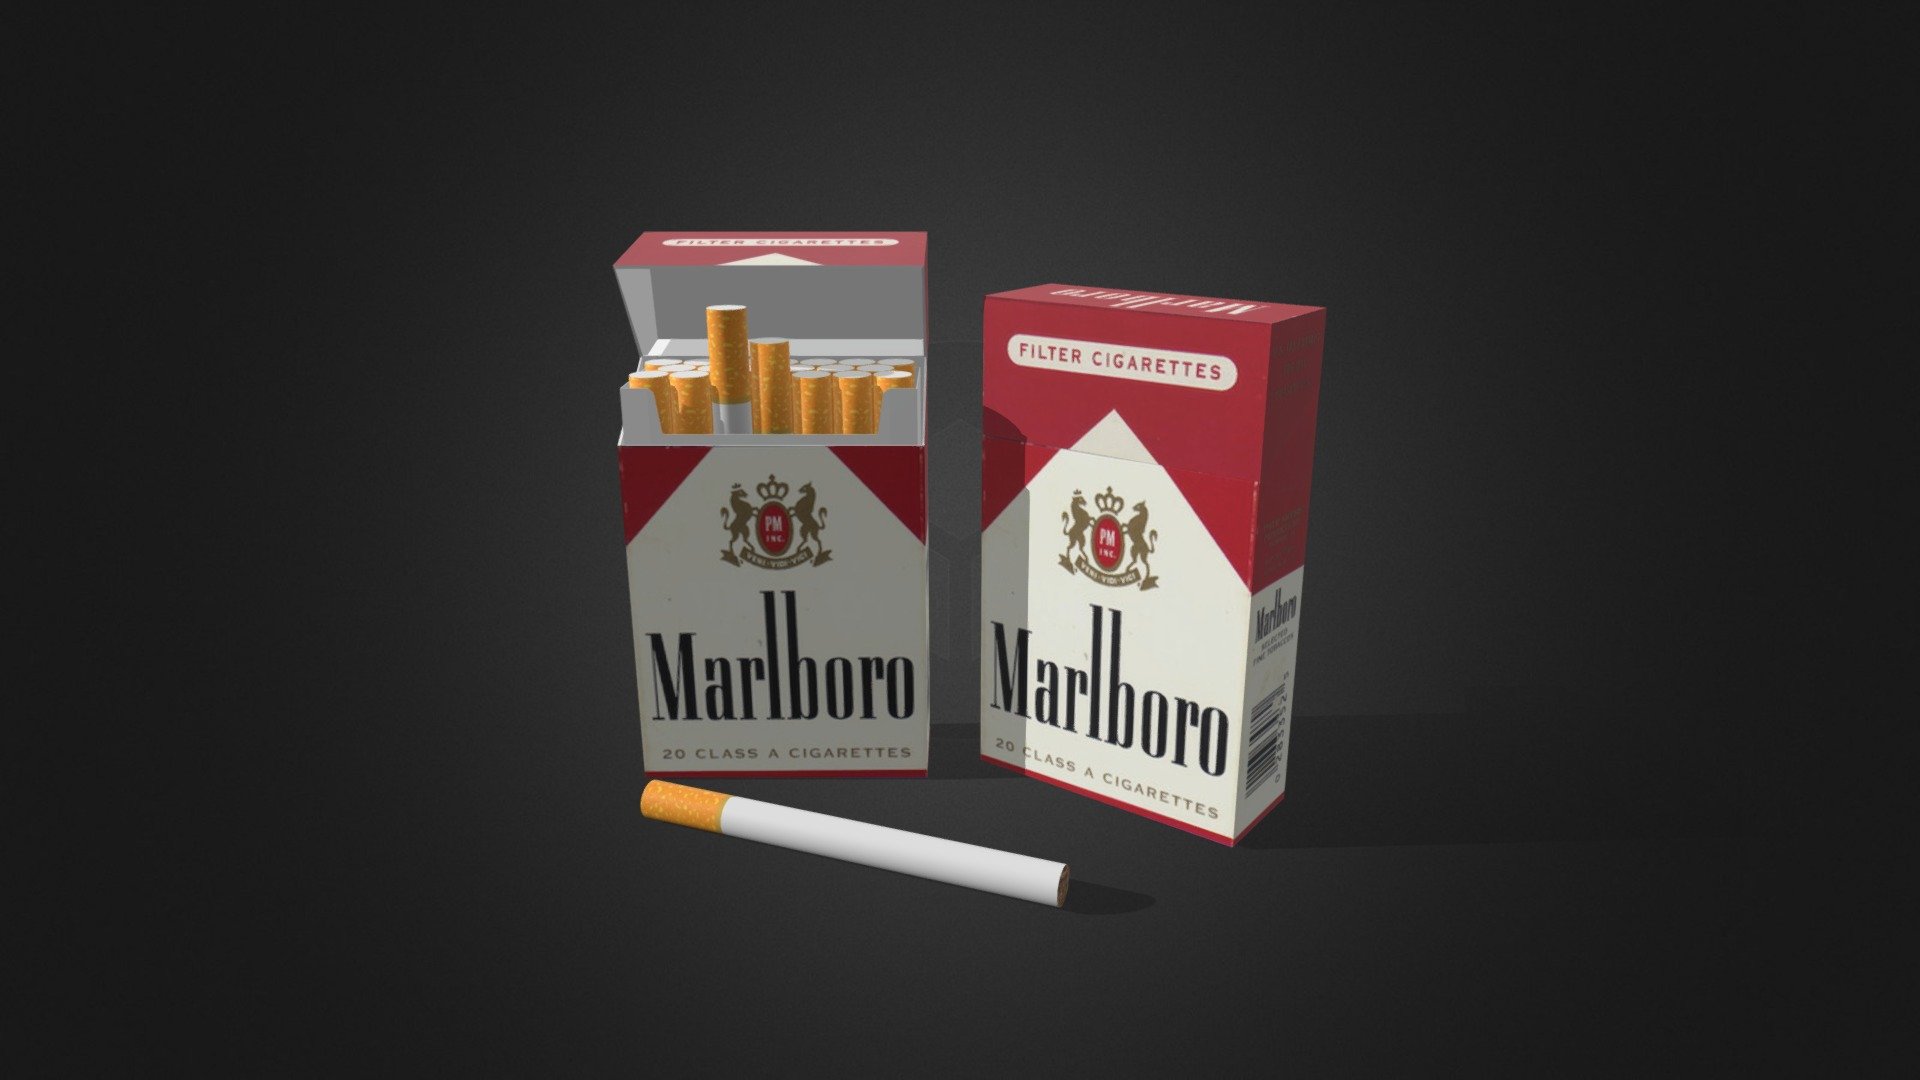 Includes both Opened and Closed Marlboro Packs, the cigarettes inside the opened pack can be taken out of it and be placed anywhere else, however, the model also includes a single cigarette out of the box.

It was fully modeled and rendered in Blender (Version 2.80)

I hope you like it!


Features:
- Model is fully textured with all materials applied.
- All textures and materials are included in the zip folder.
- Everything is named and organized properly


File Formats:
- blend (Original file)
- OBJ (Multi Format)
- FBX (Multi Format)

Buy it here:
https://bit.ly/3gGE4s0 - Cigarettes Pack Opened and Closed - 3D model by amurin 3d model